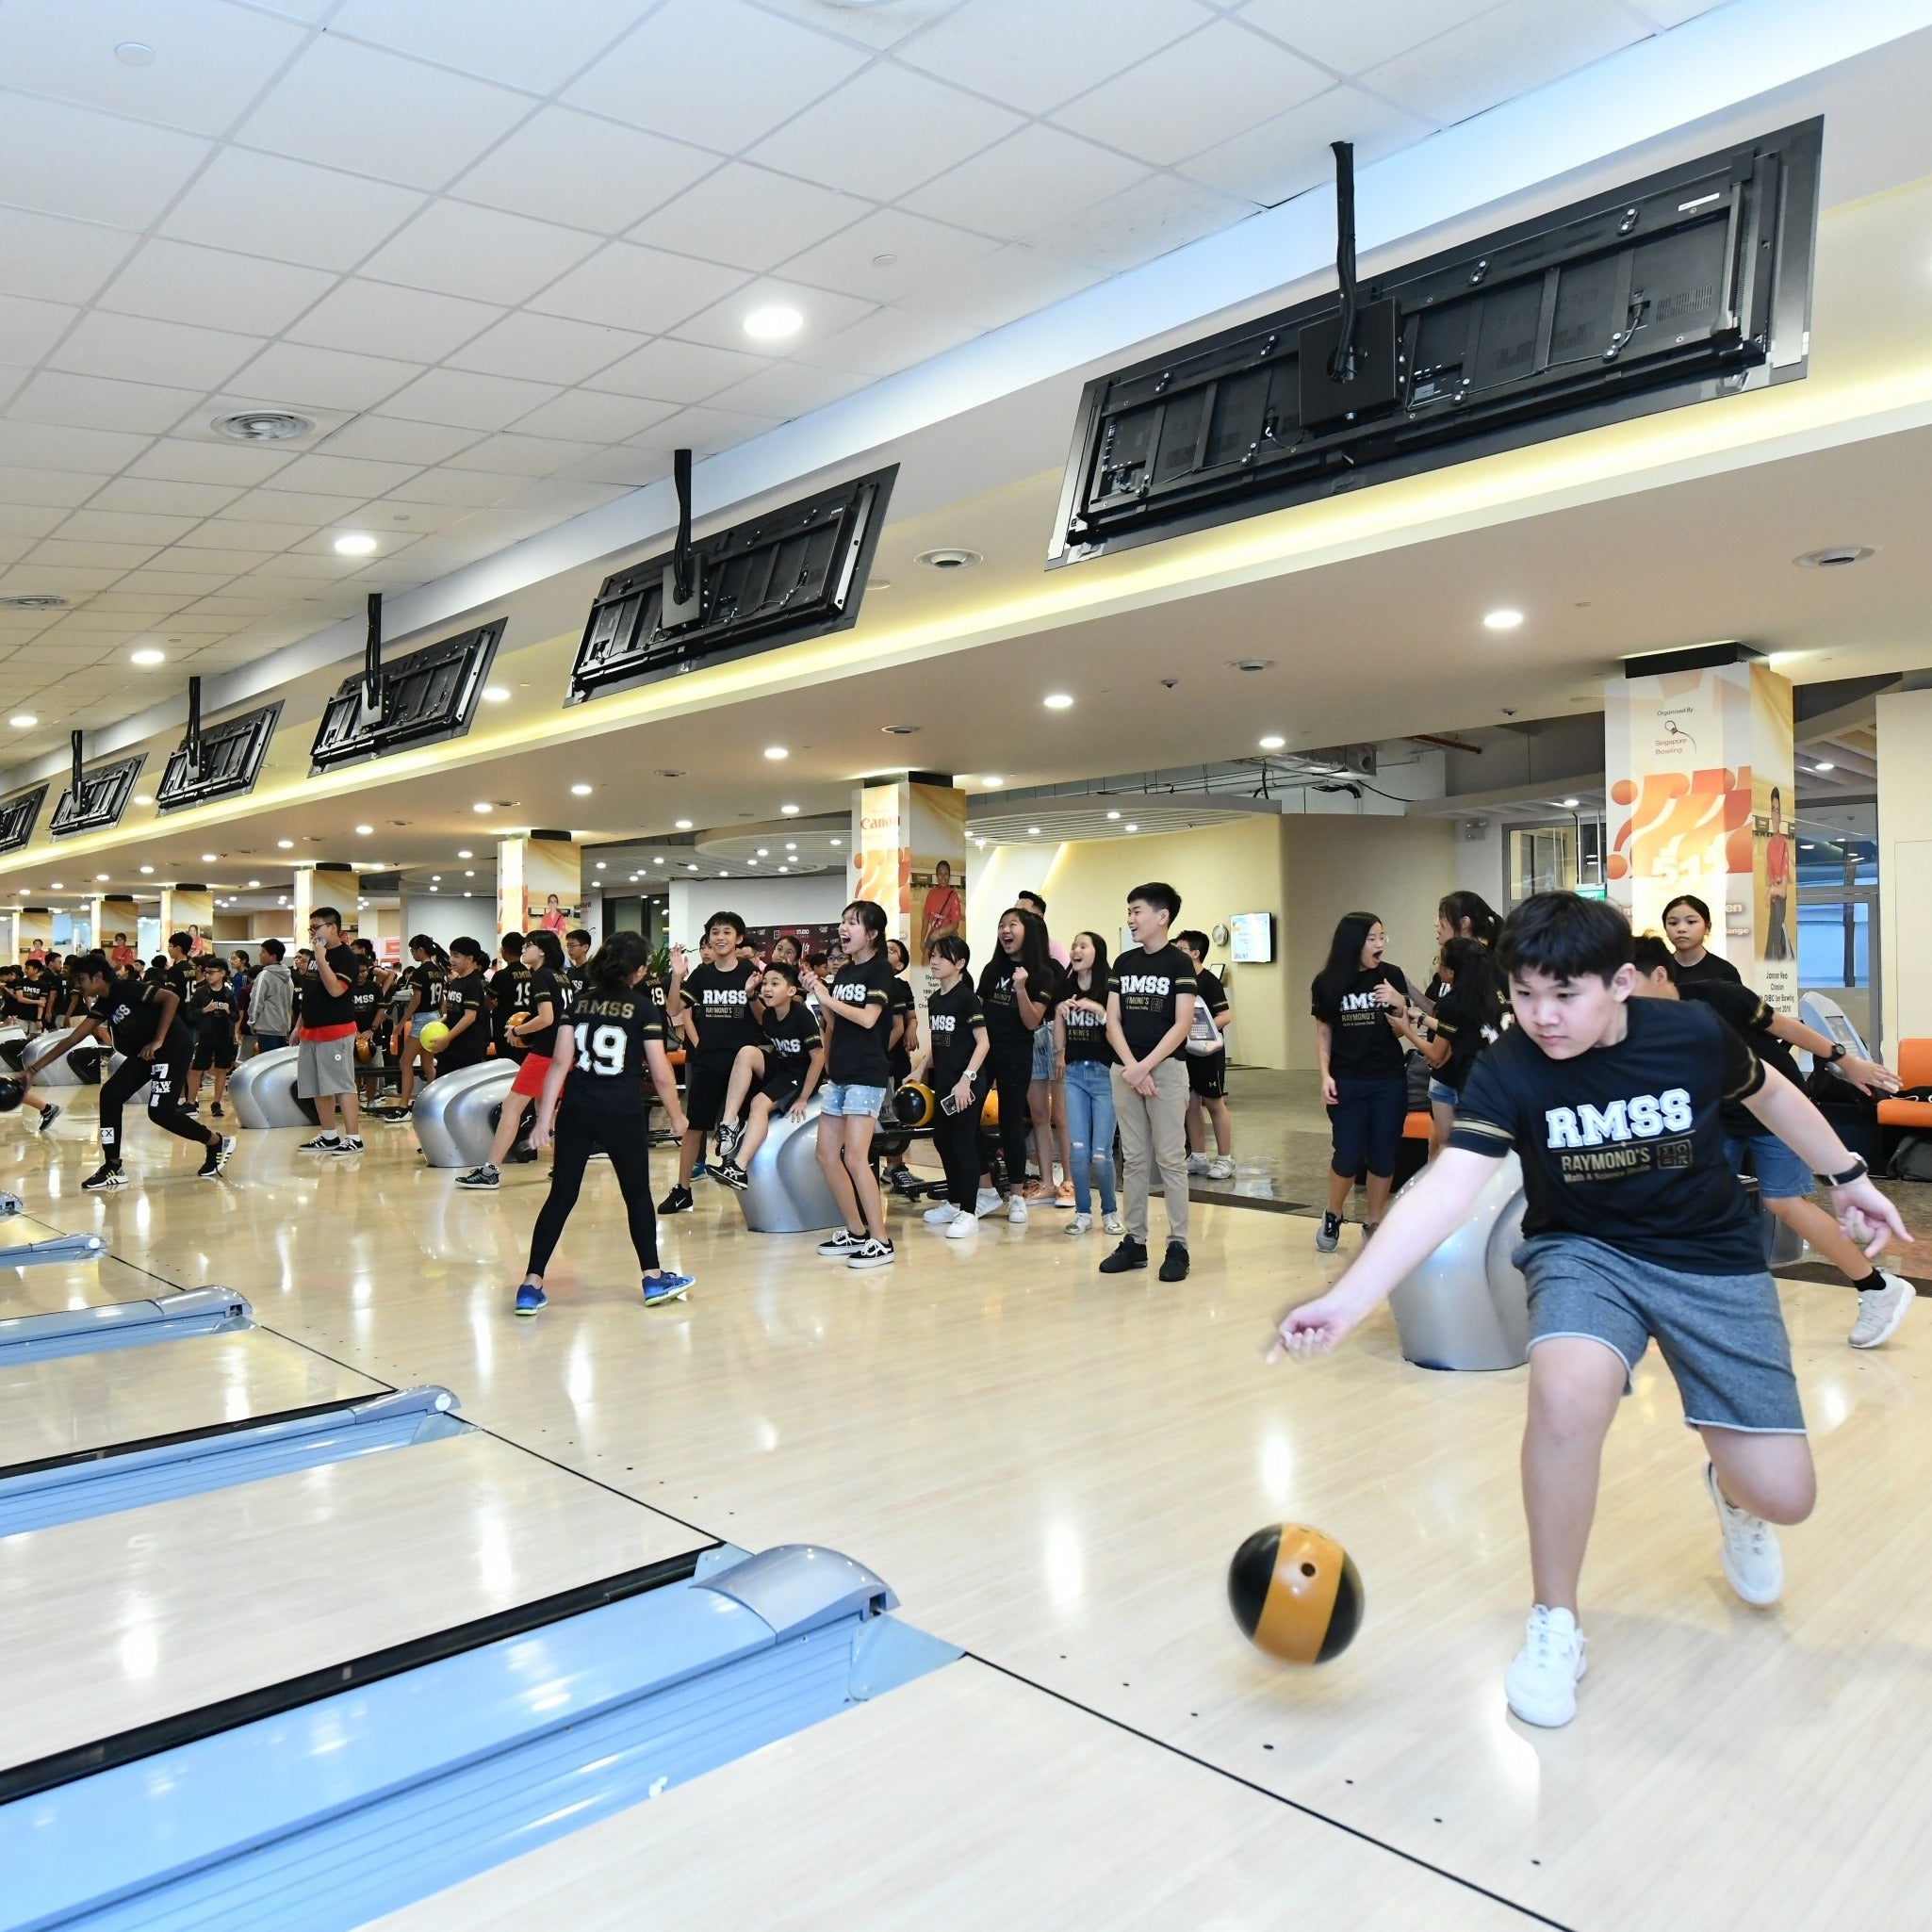 1 Hour x 2 Lanes Unlimited Bowling Games for up to 5 Pax @ Just $50 (U.P $70) - BYKidO